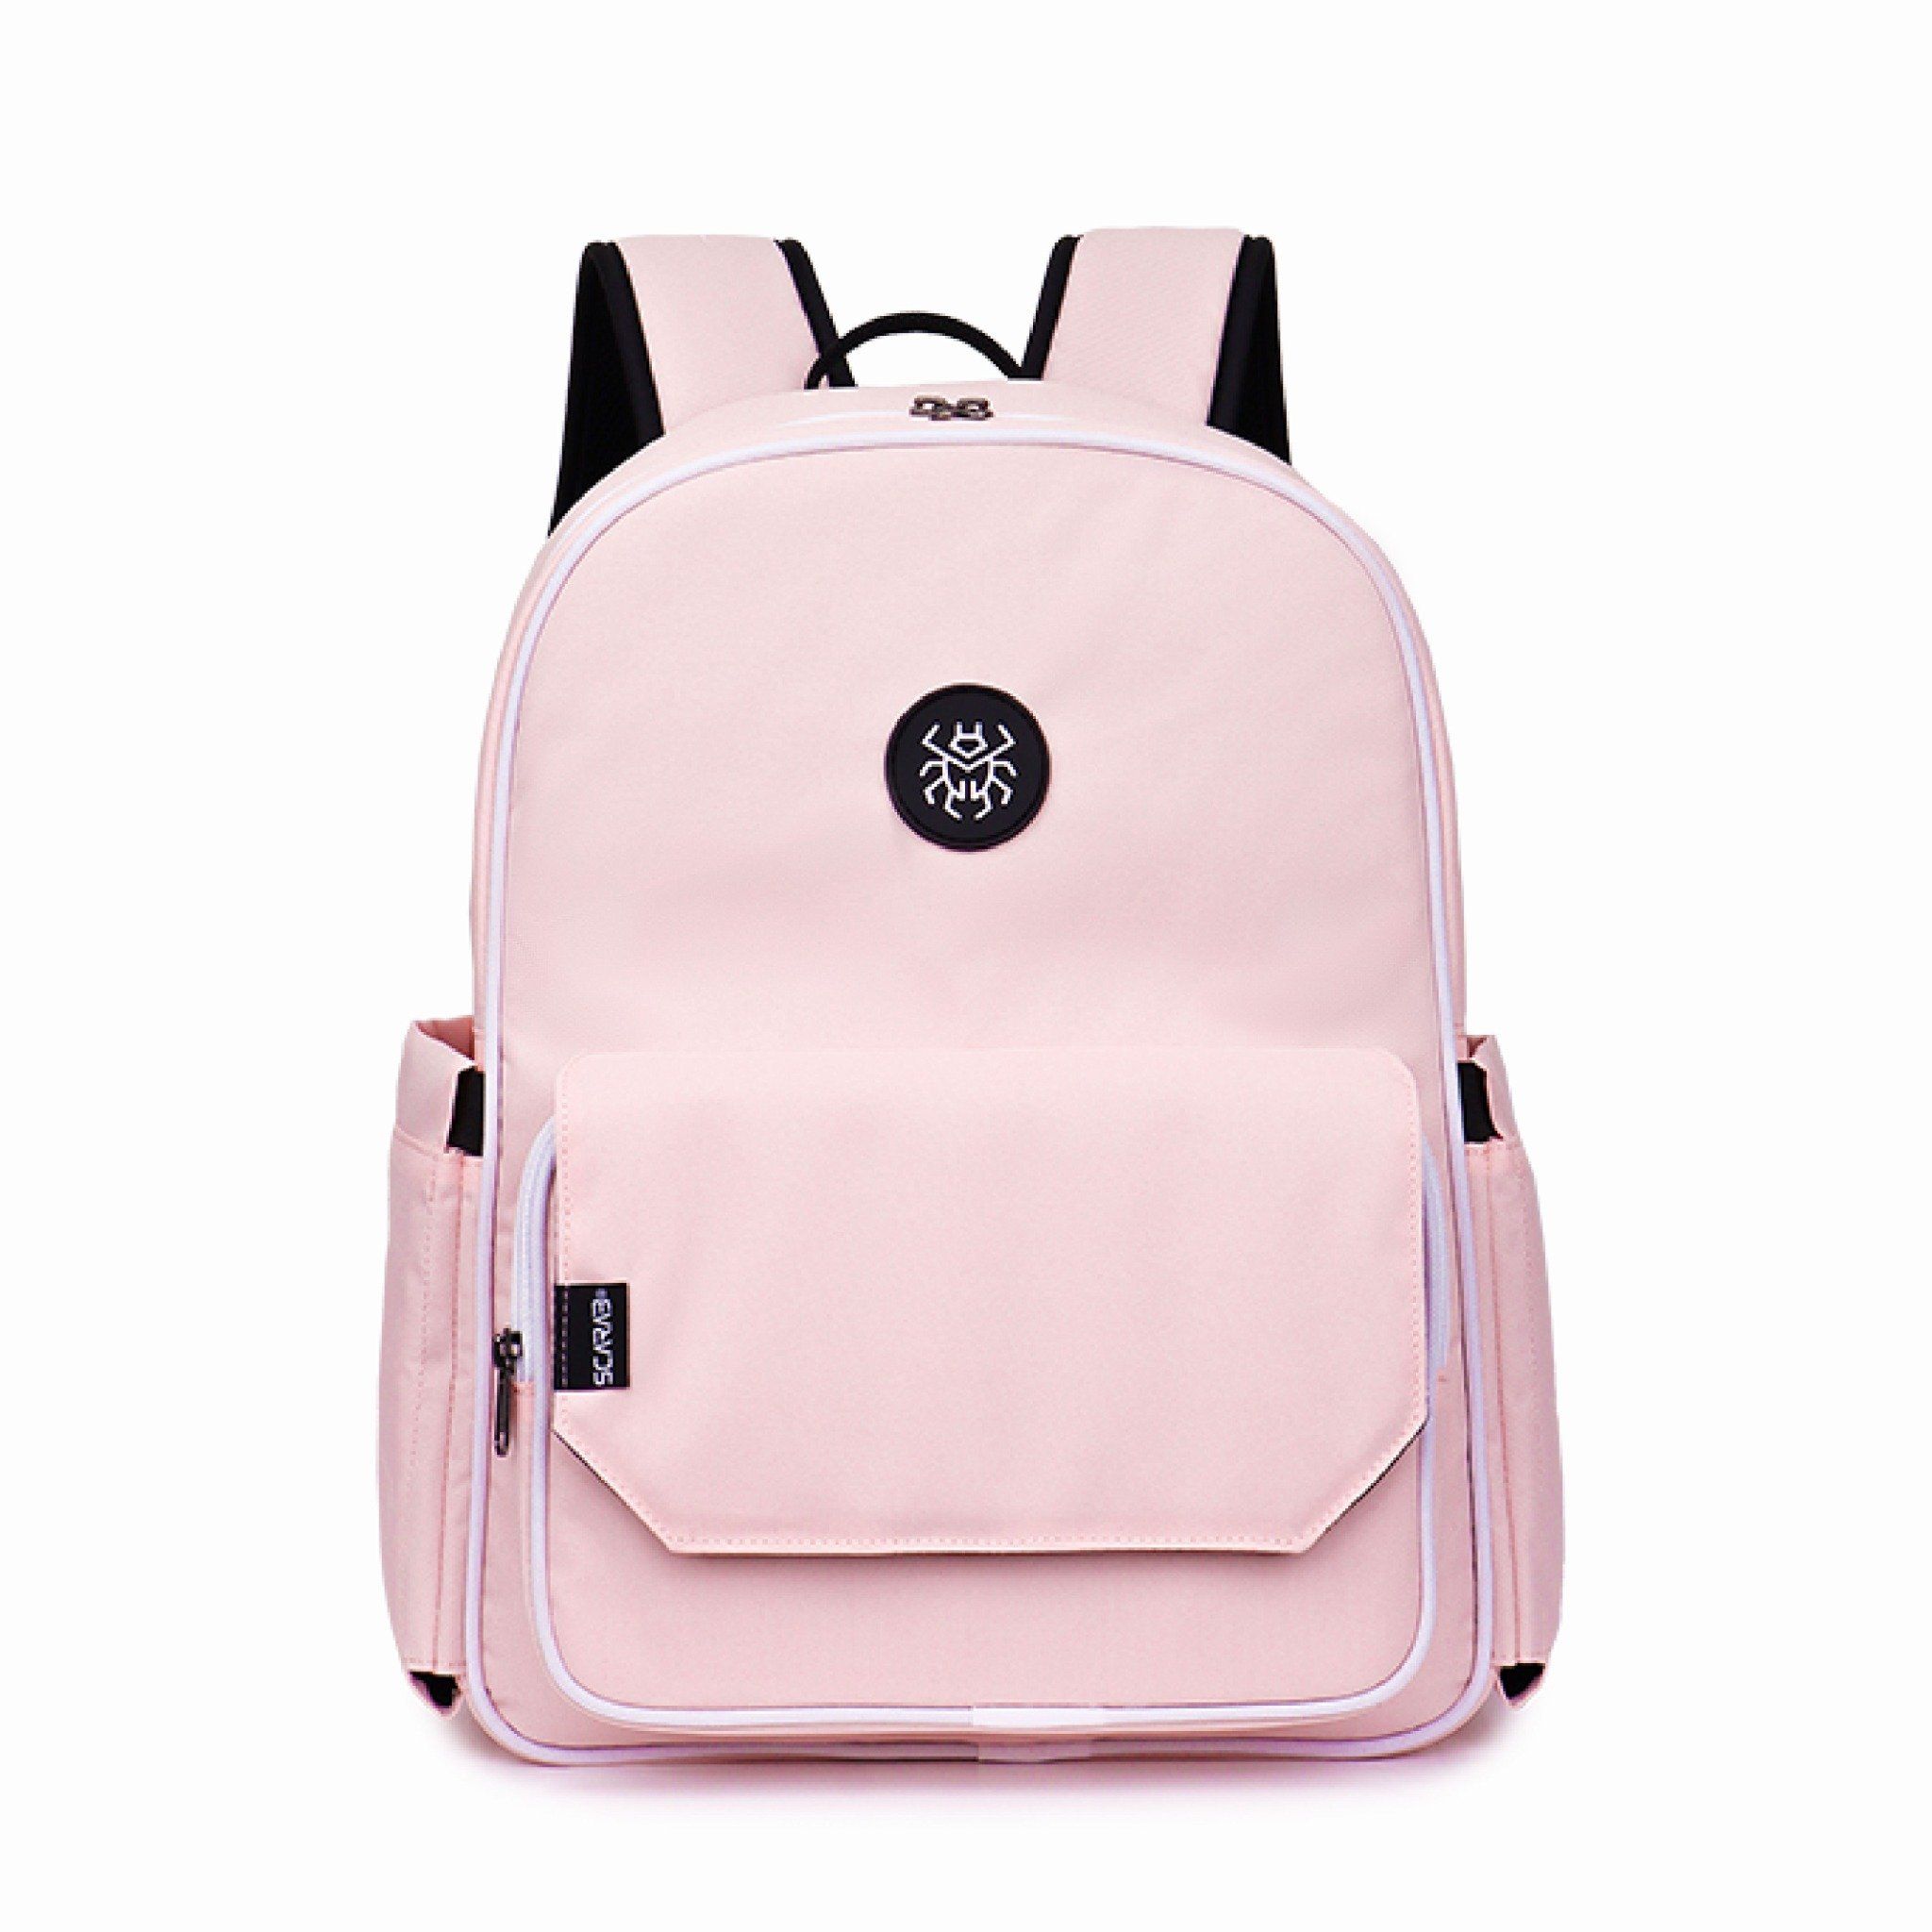  Daypack Backpack - Baby Pink 